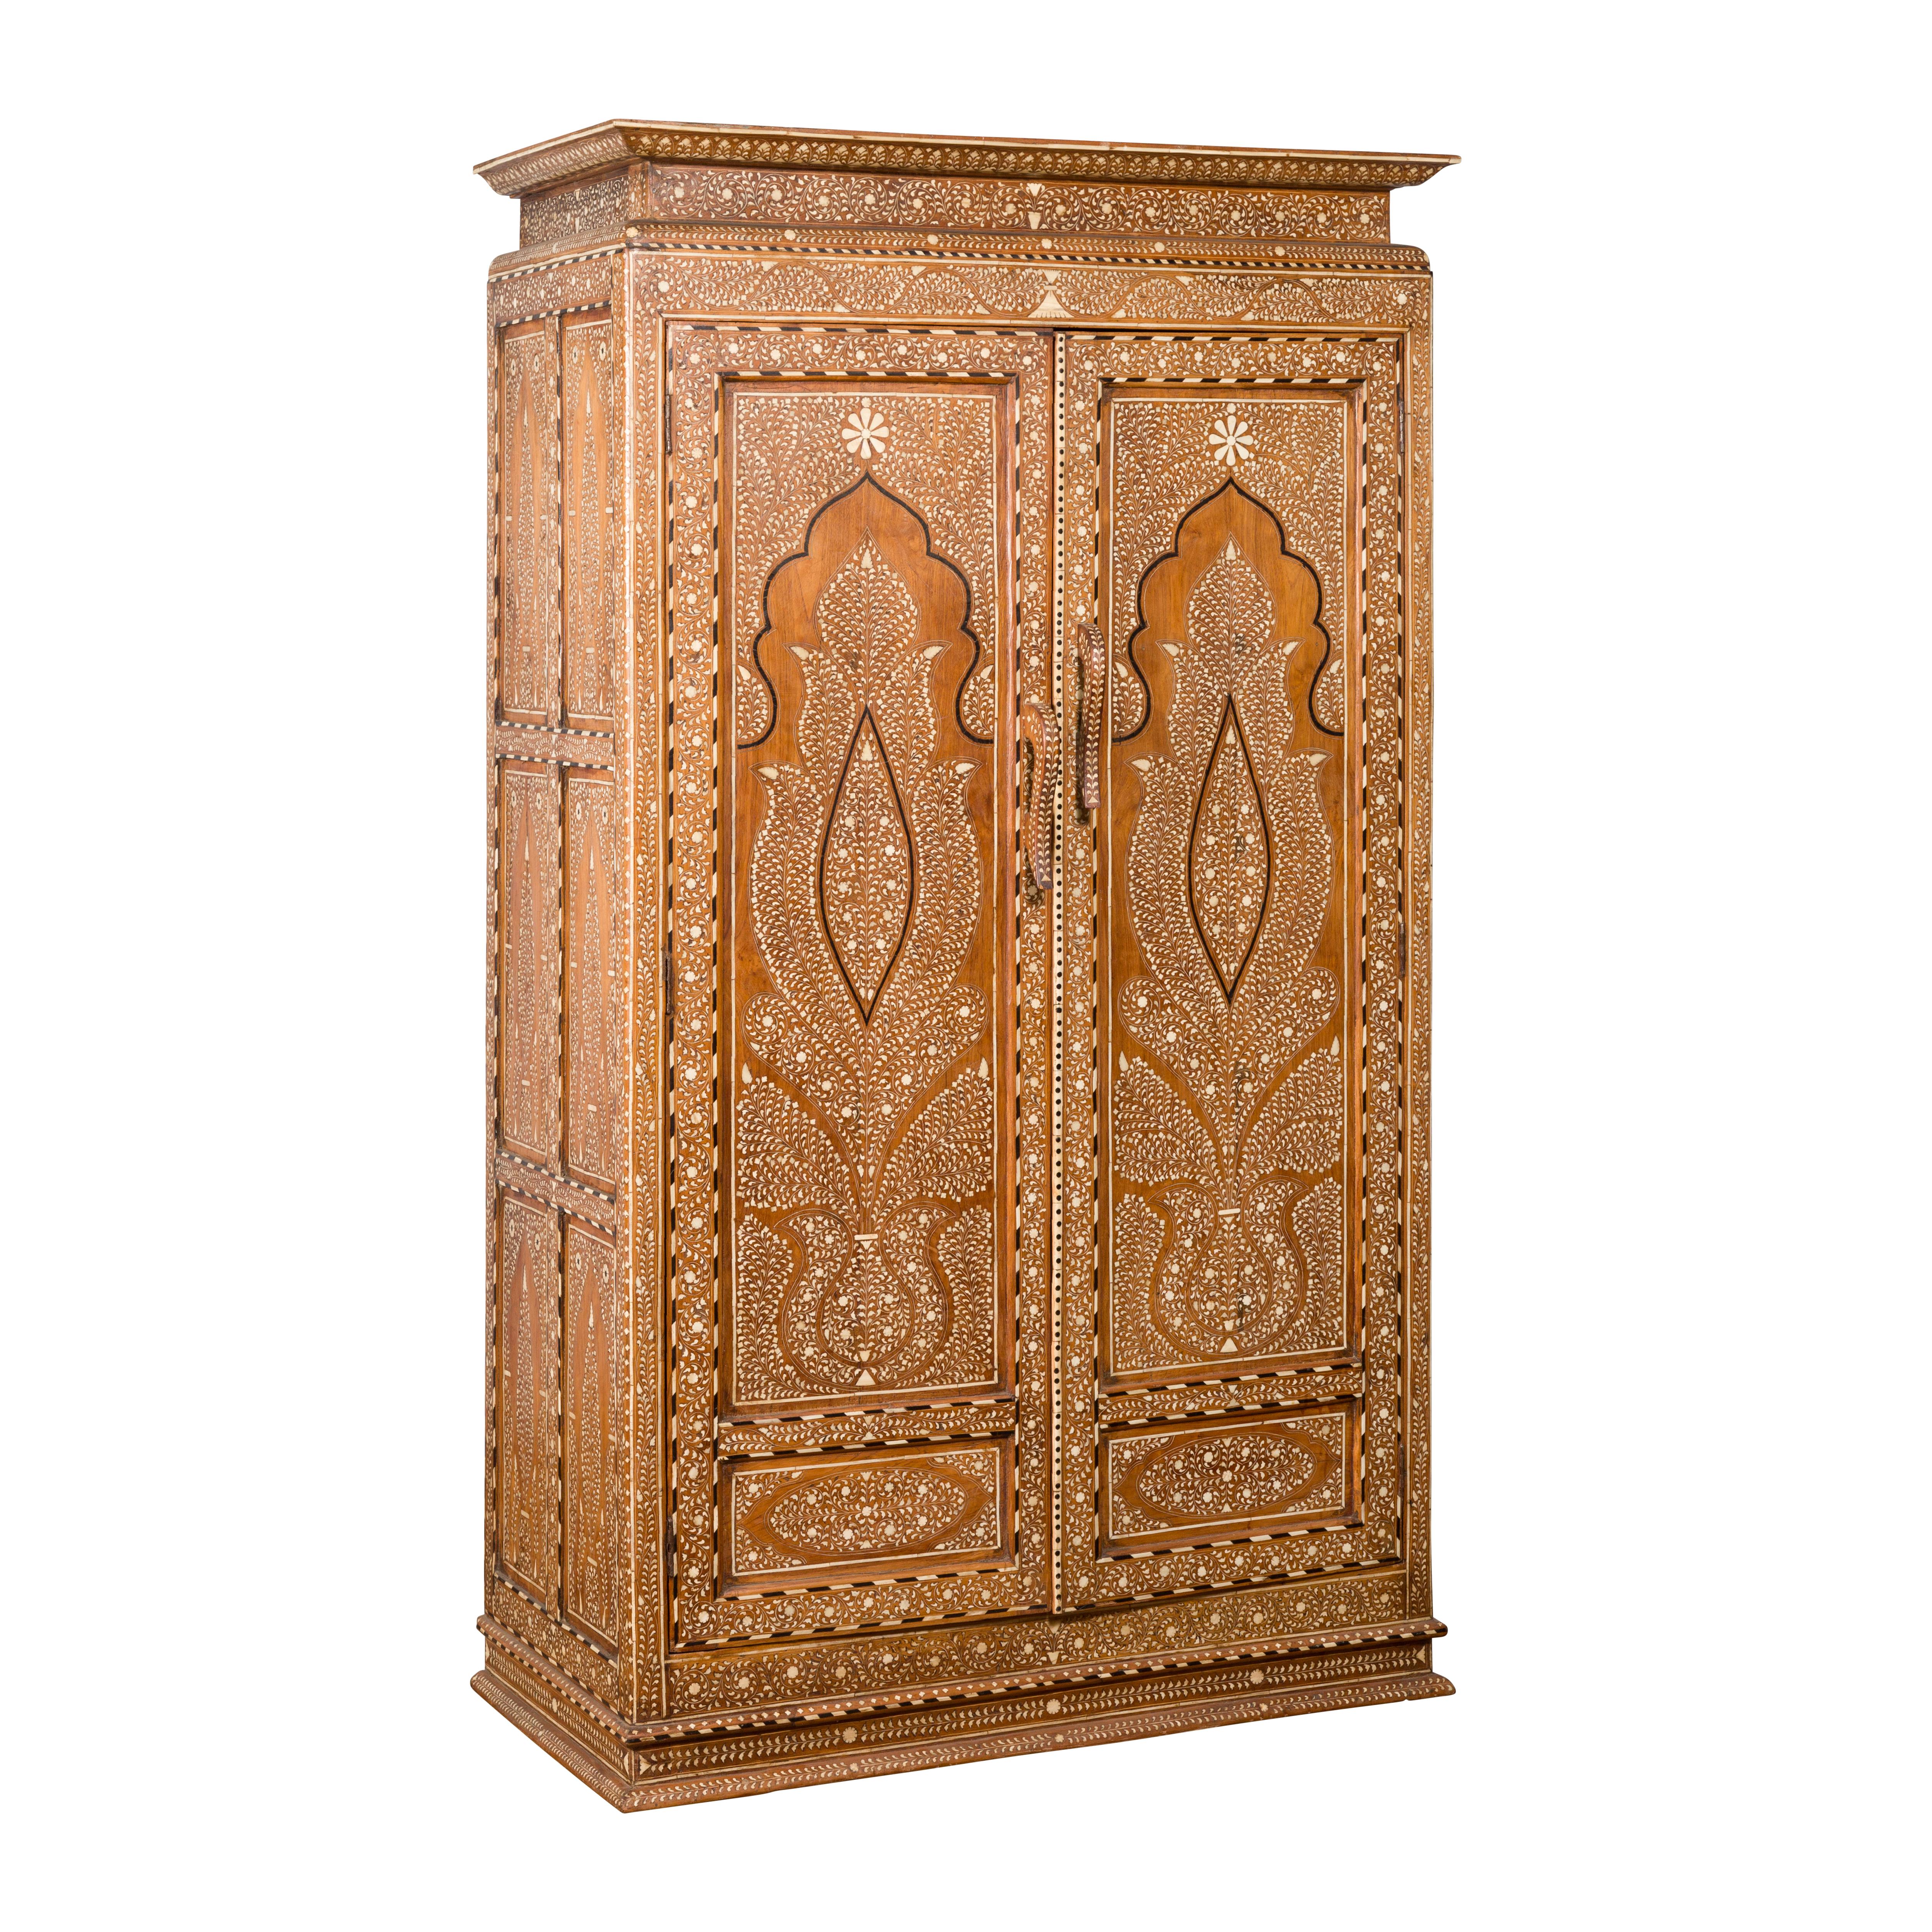 A vintage Anglo-Indian inlaid wooden wardrobe cabinet from the mid-20th century, with ebonized accents, bone and horn inlay. Capturing our attention with its intricate decor, his tall cabinet is adorned with an abundant decor of foliage and